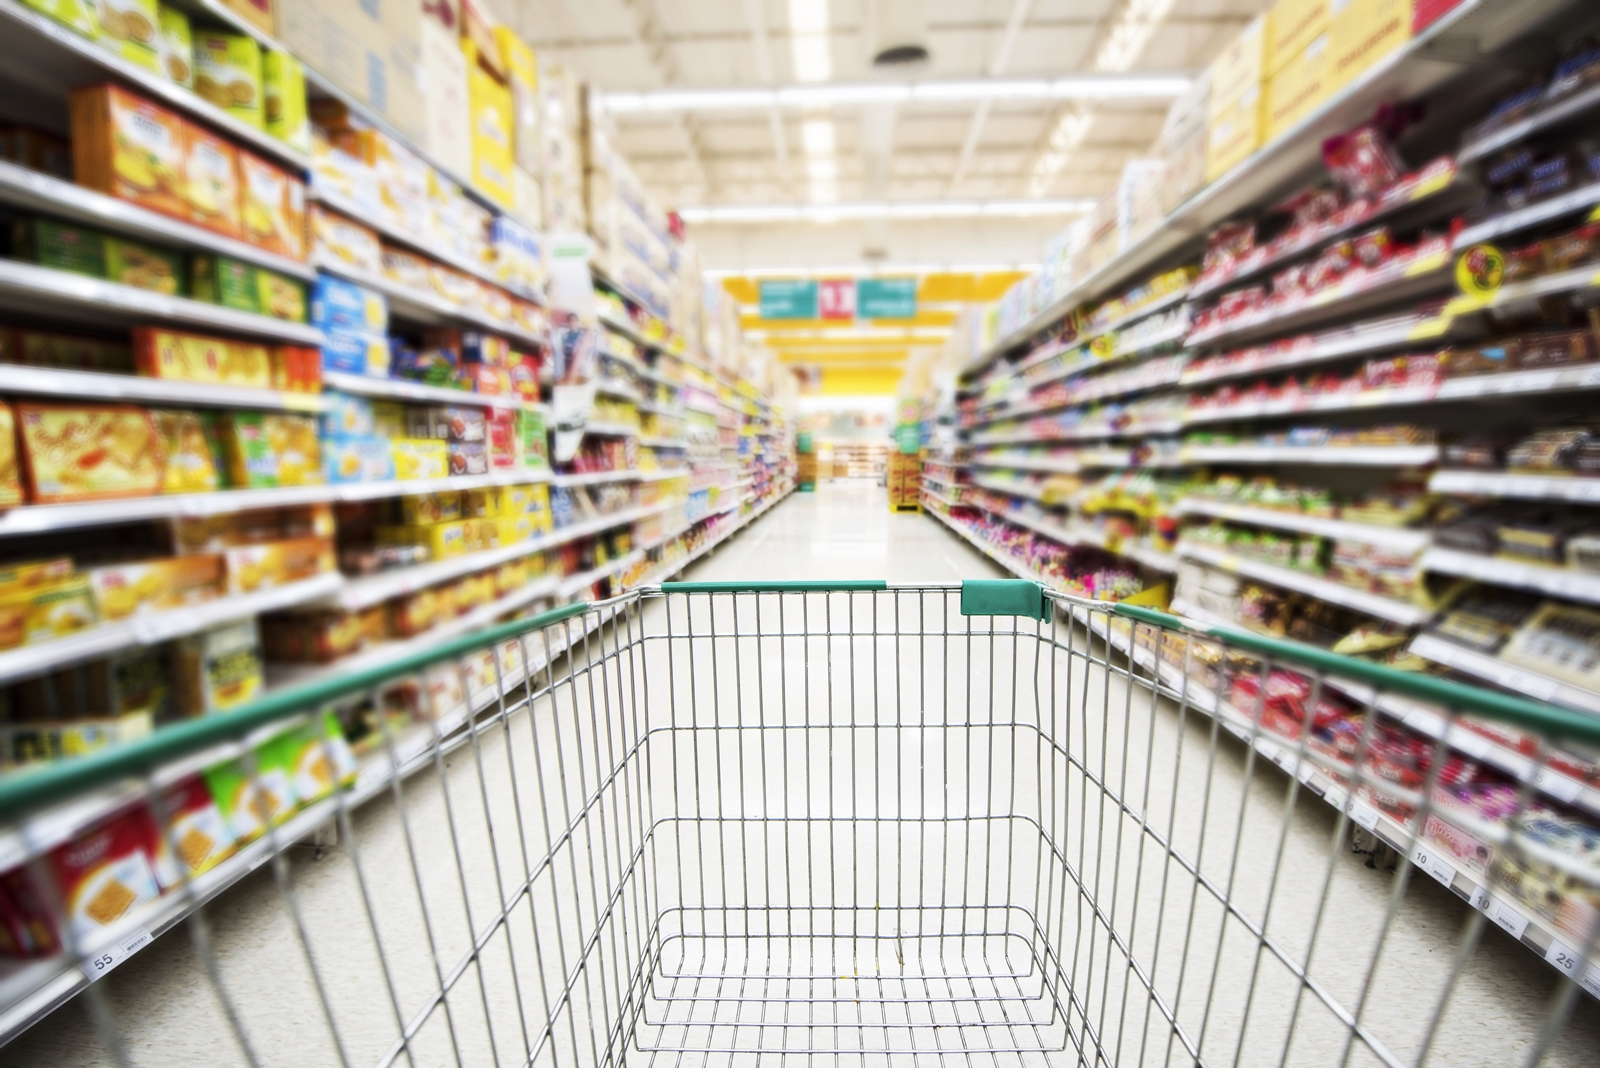 Electronic Shelf Labels: Top 4 Benefits of This Top-Shelf Technology